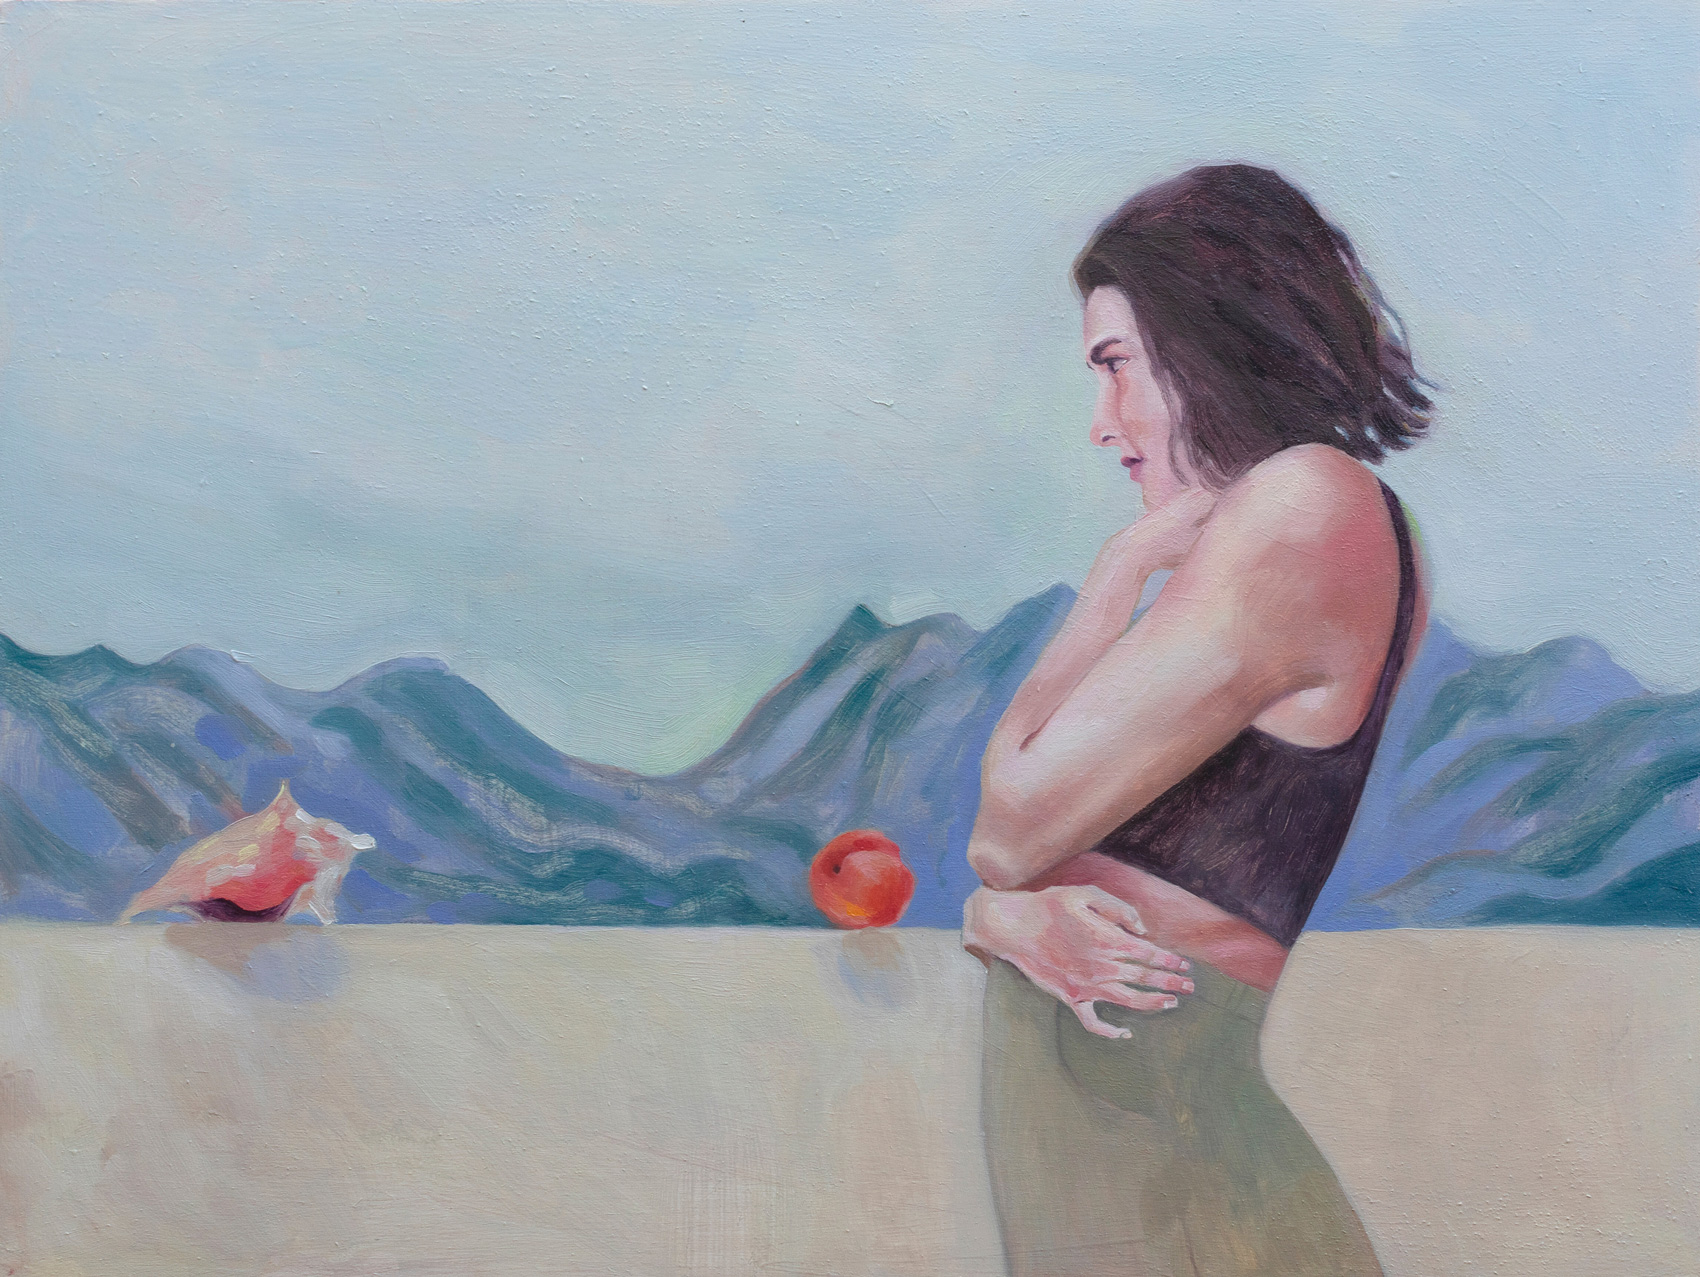 a woman looking past the frame of the painting, standing in front of mountains. There's a nectarine and a shell on a ledge behind her